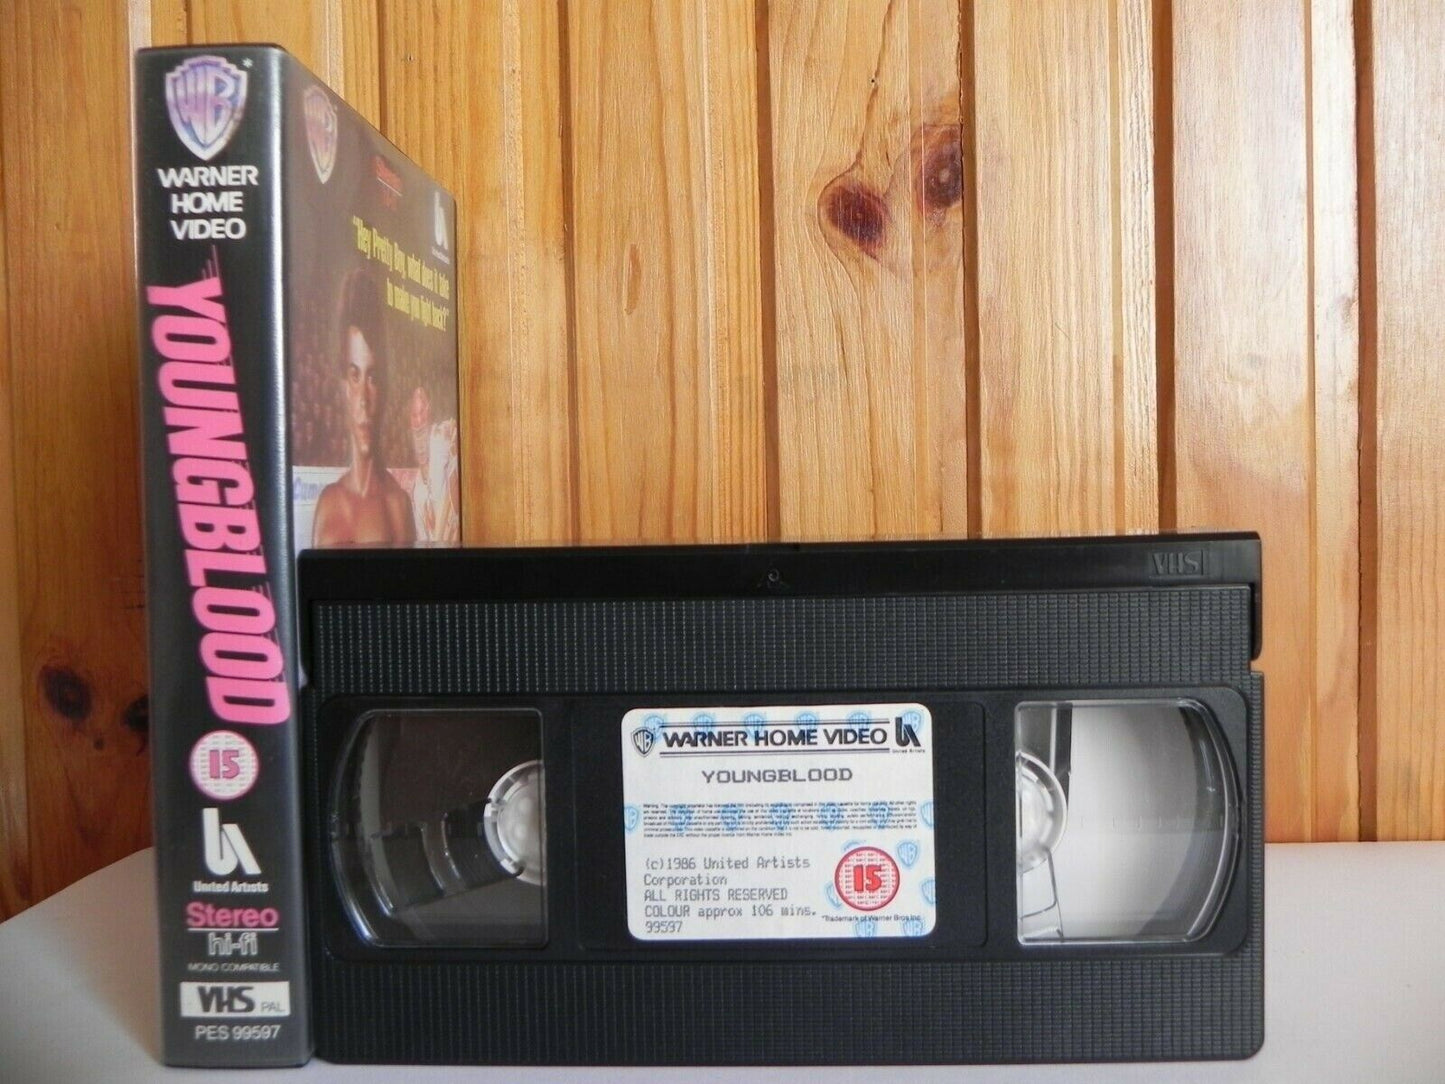 Youngblood: Drama - Sport Film - Ice Hockey - Rob Lowe (Young Blood) - Pal VHS-